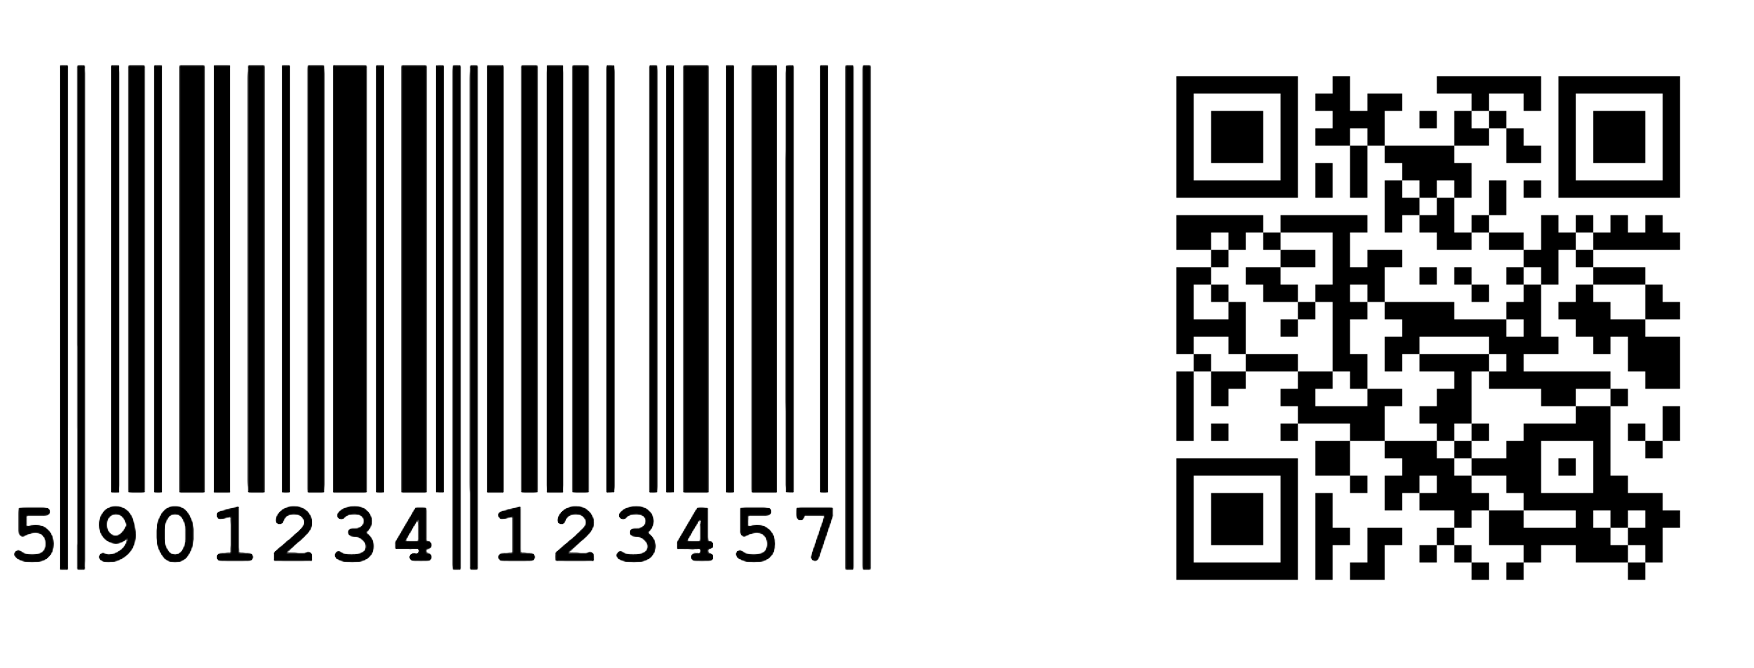 Barcode/QR examples